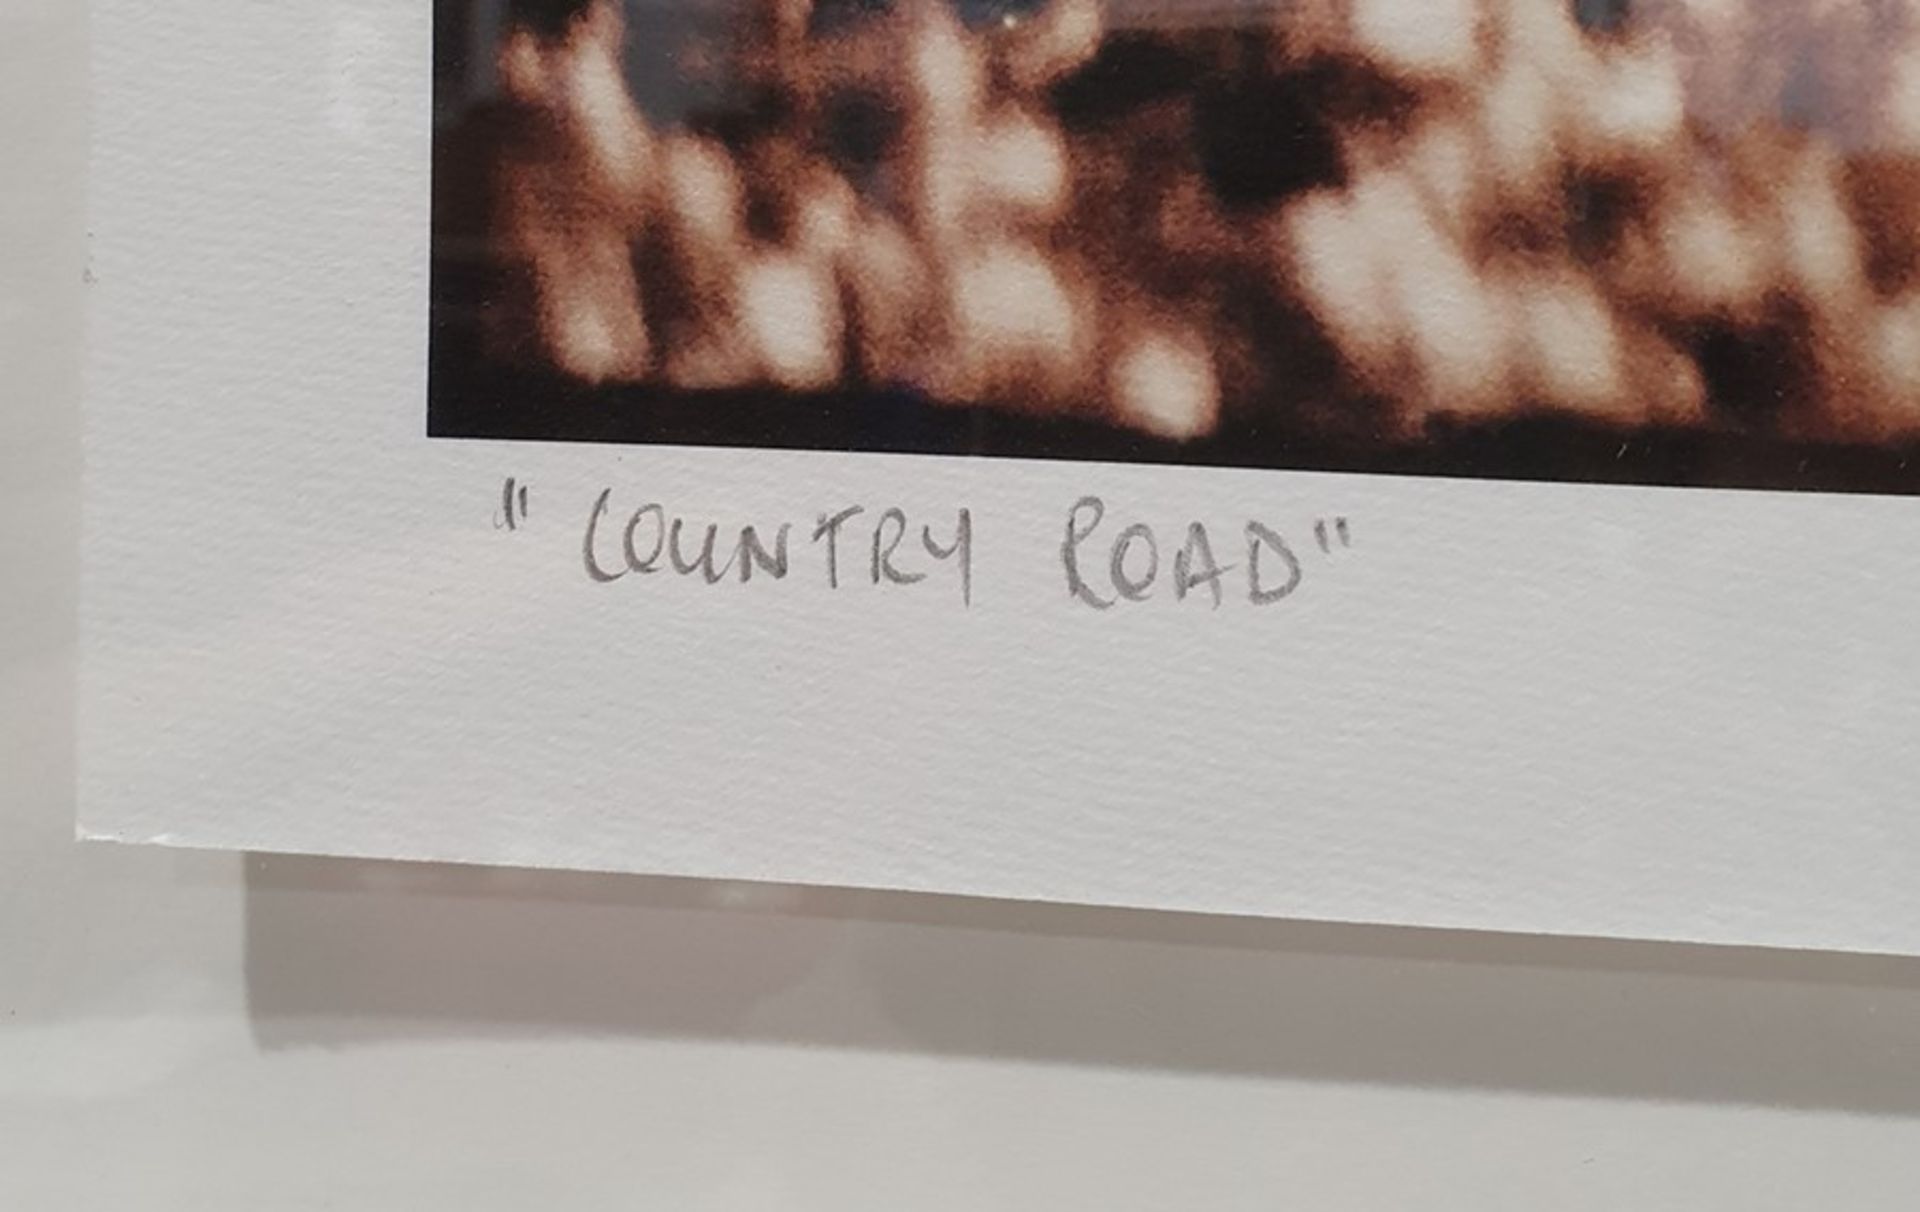 Photographic print titled 'Country Road' and signed indistinctly in pencil 'Martin(?)', 48cm x 70cm - Image 4 of 4